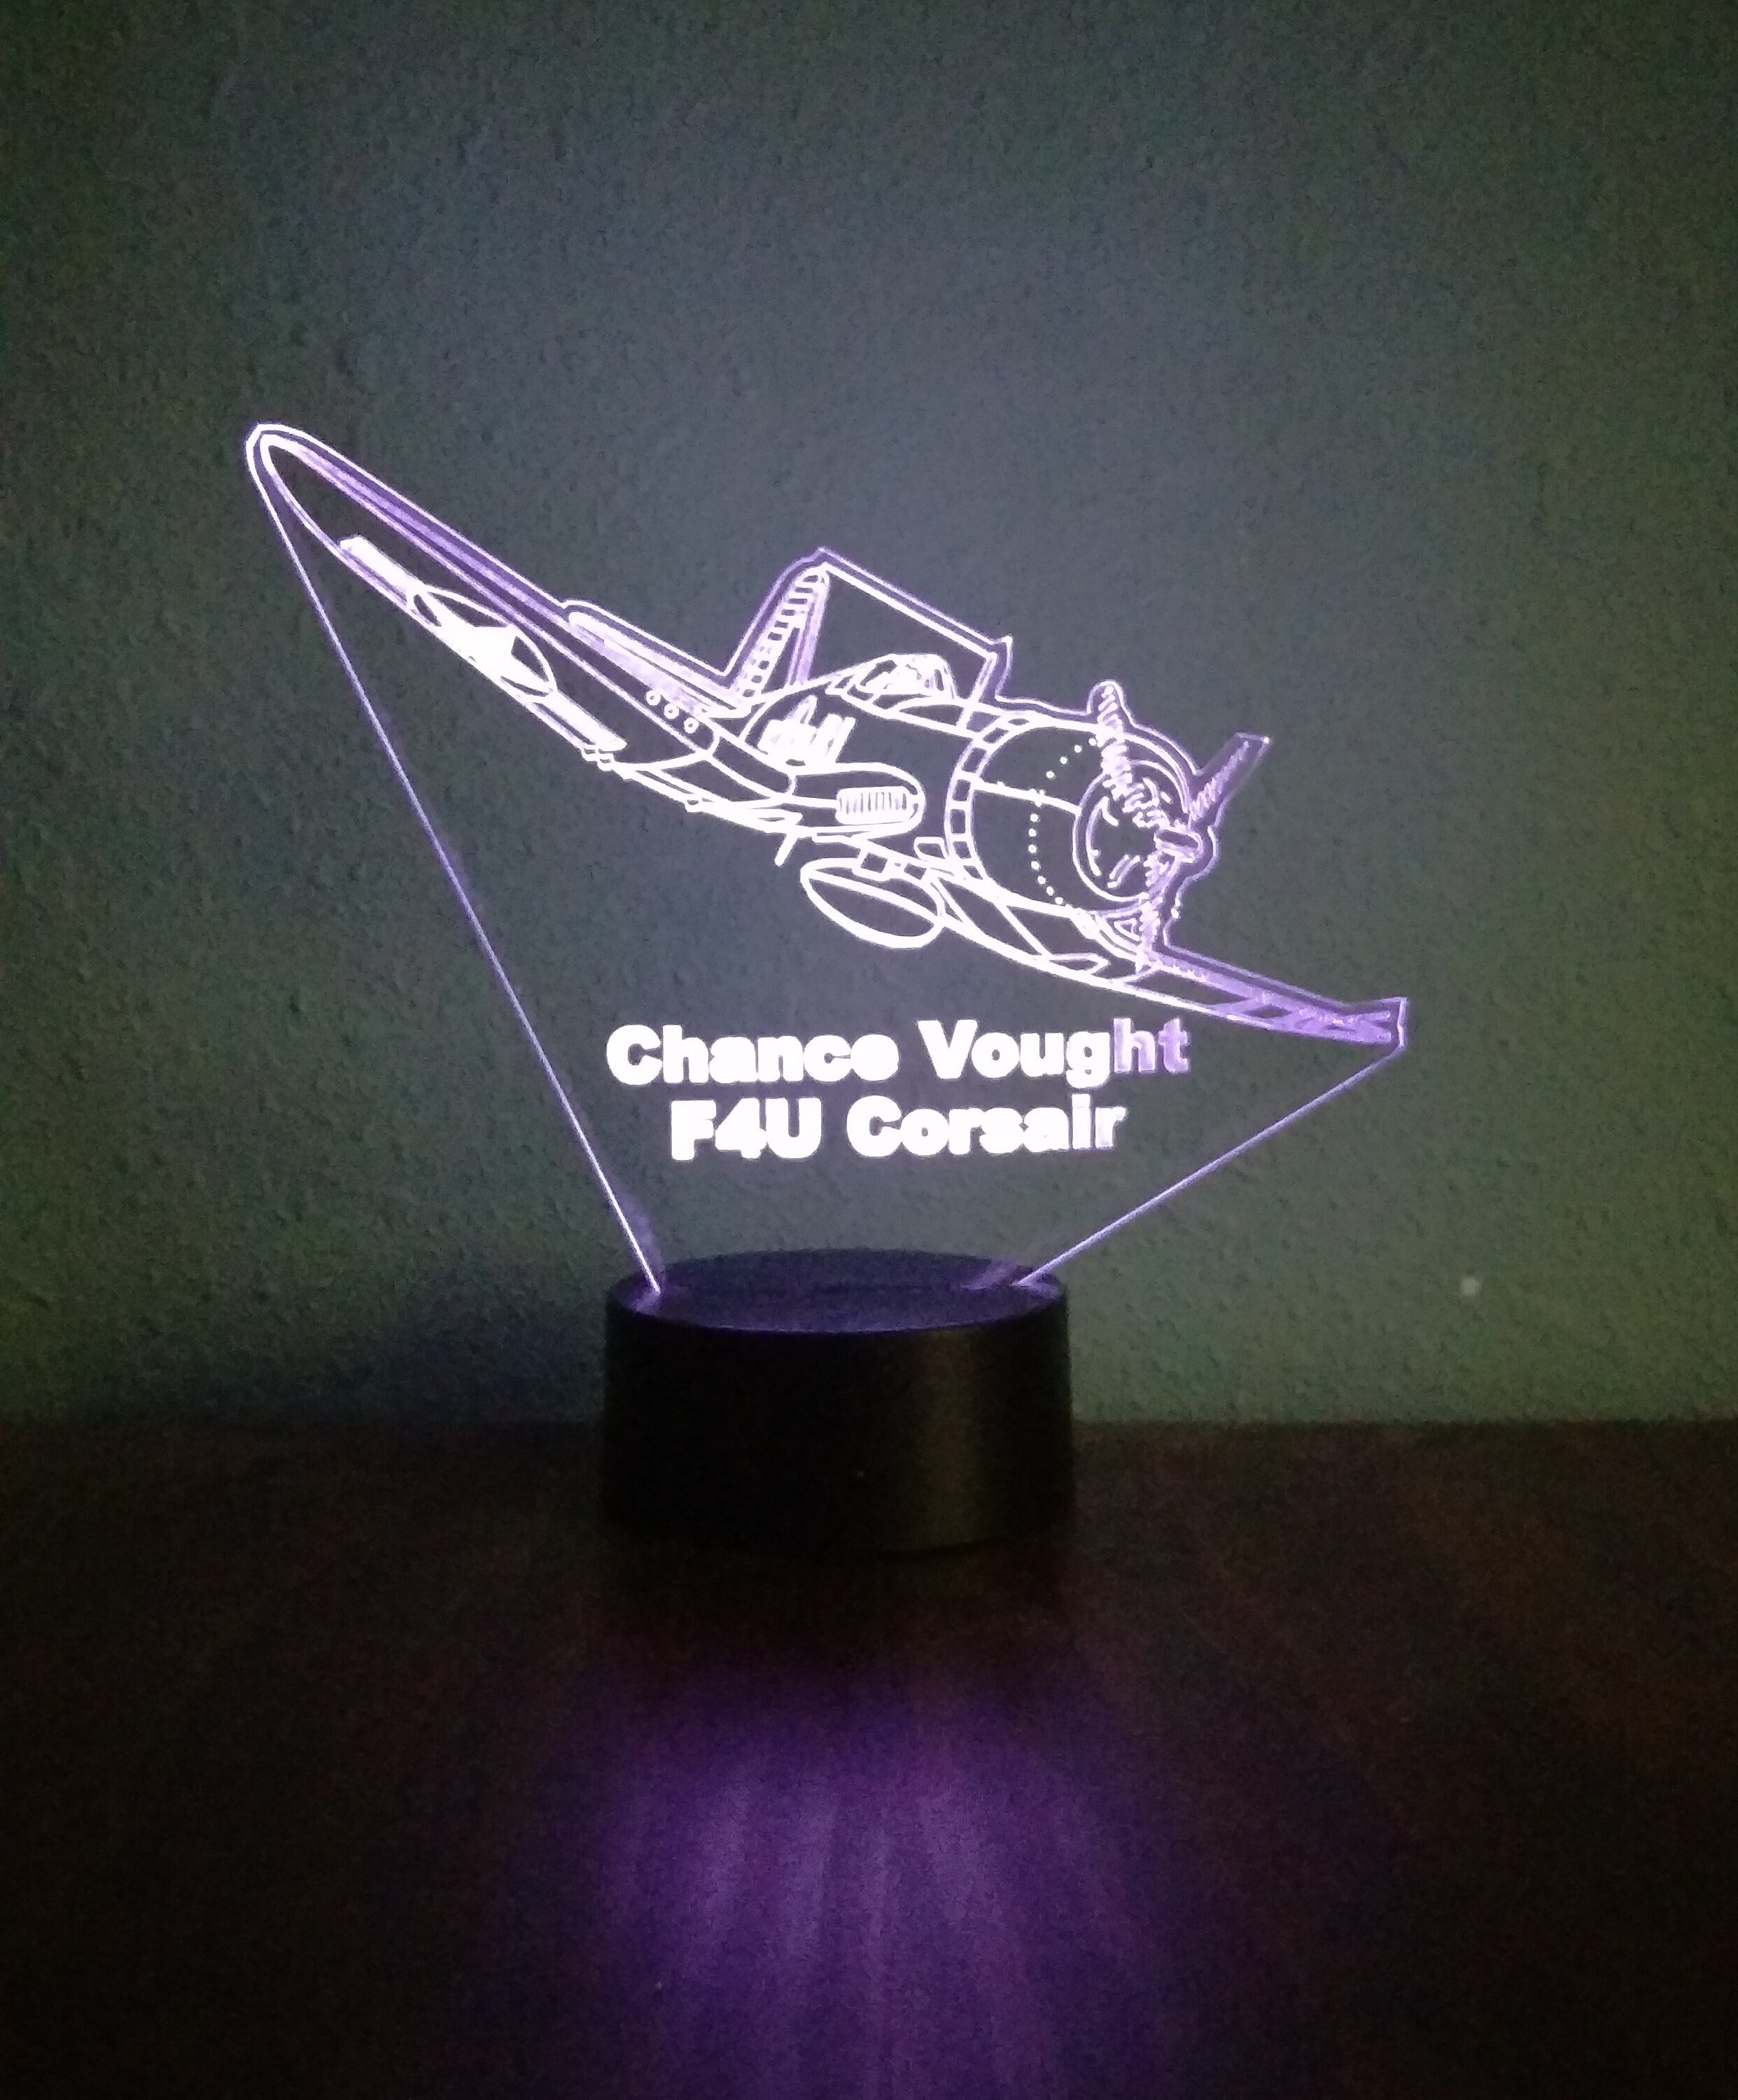 Awesome "Chance Vought F4U Corsair" LED 3D lamp (1111) - FREE SHIPPING!